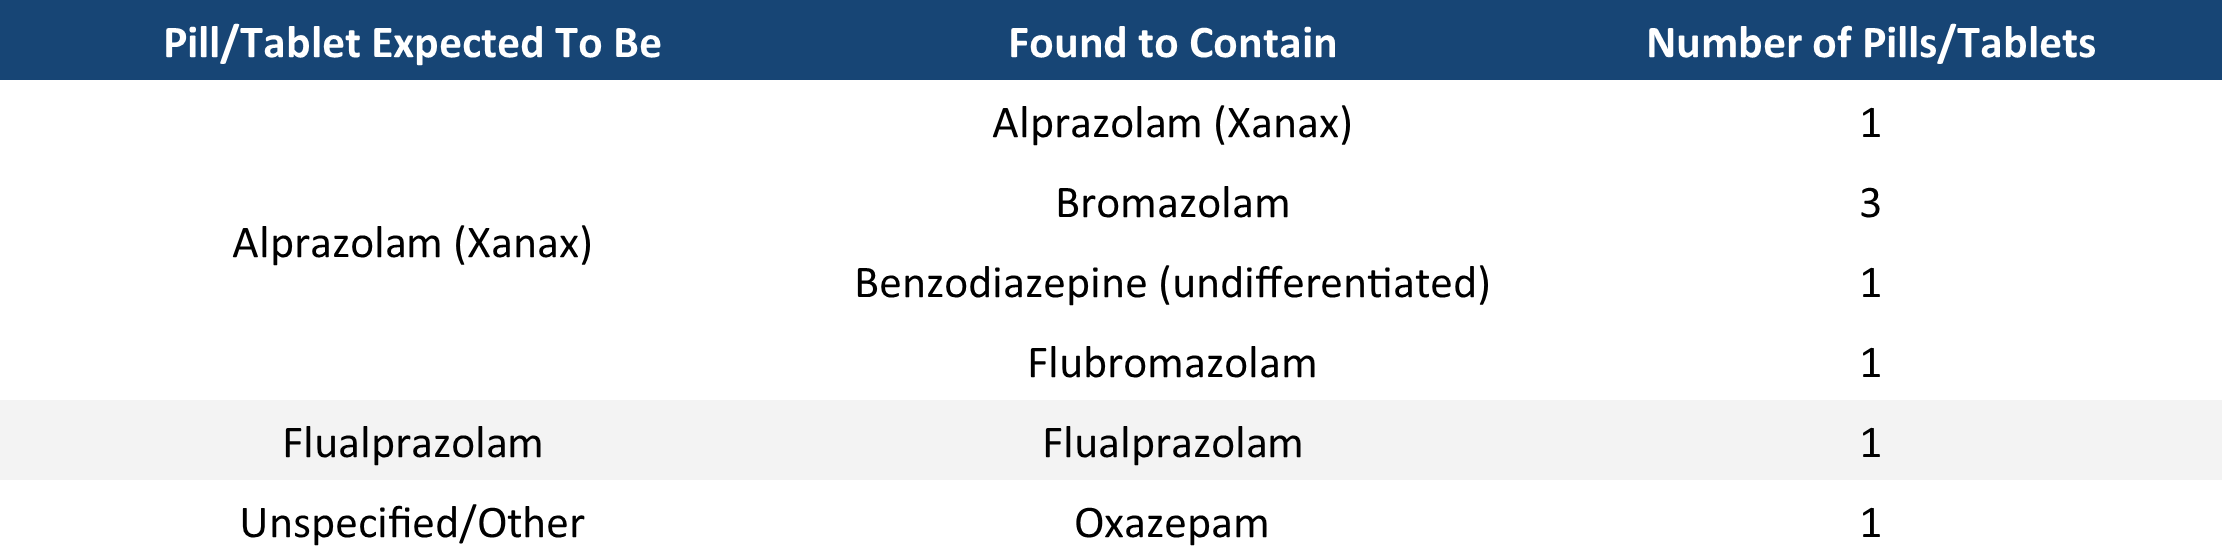 Table 2. The composition of benzodiazepine pressed pills checked in October. “Expected To Be” describes the benzo expected/reported by the service user, while “Found To Contain” describes the contents we found through the drug check. “Undifferentiated benzodiazepine” refers to samples where the benzo strip test was positive but no benzos were identified with our other instruments. These “undifferentiated” samples either contain a benzo at very low concentrations and/or novel benzos that are not in our targeted method for the mass spectrometer.